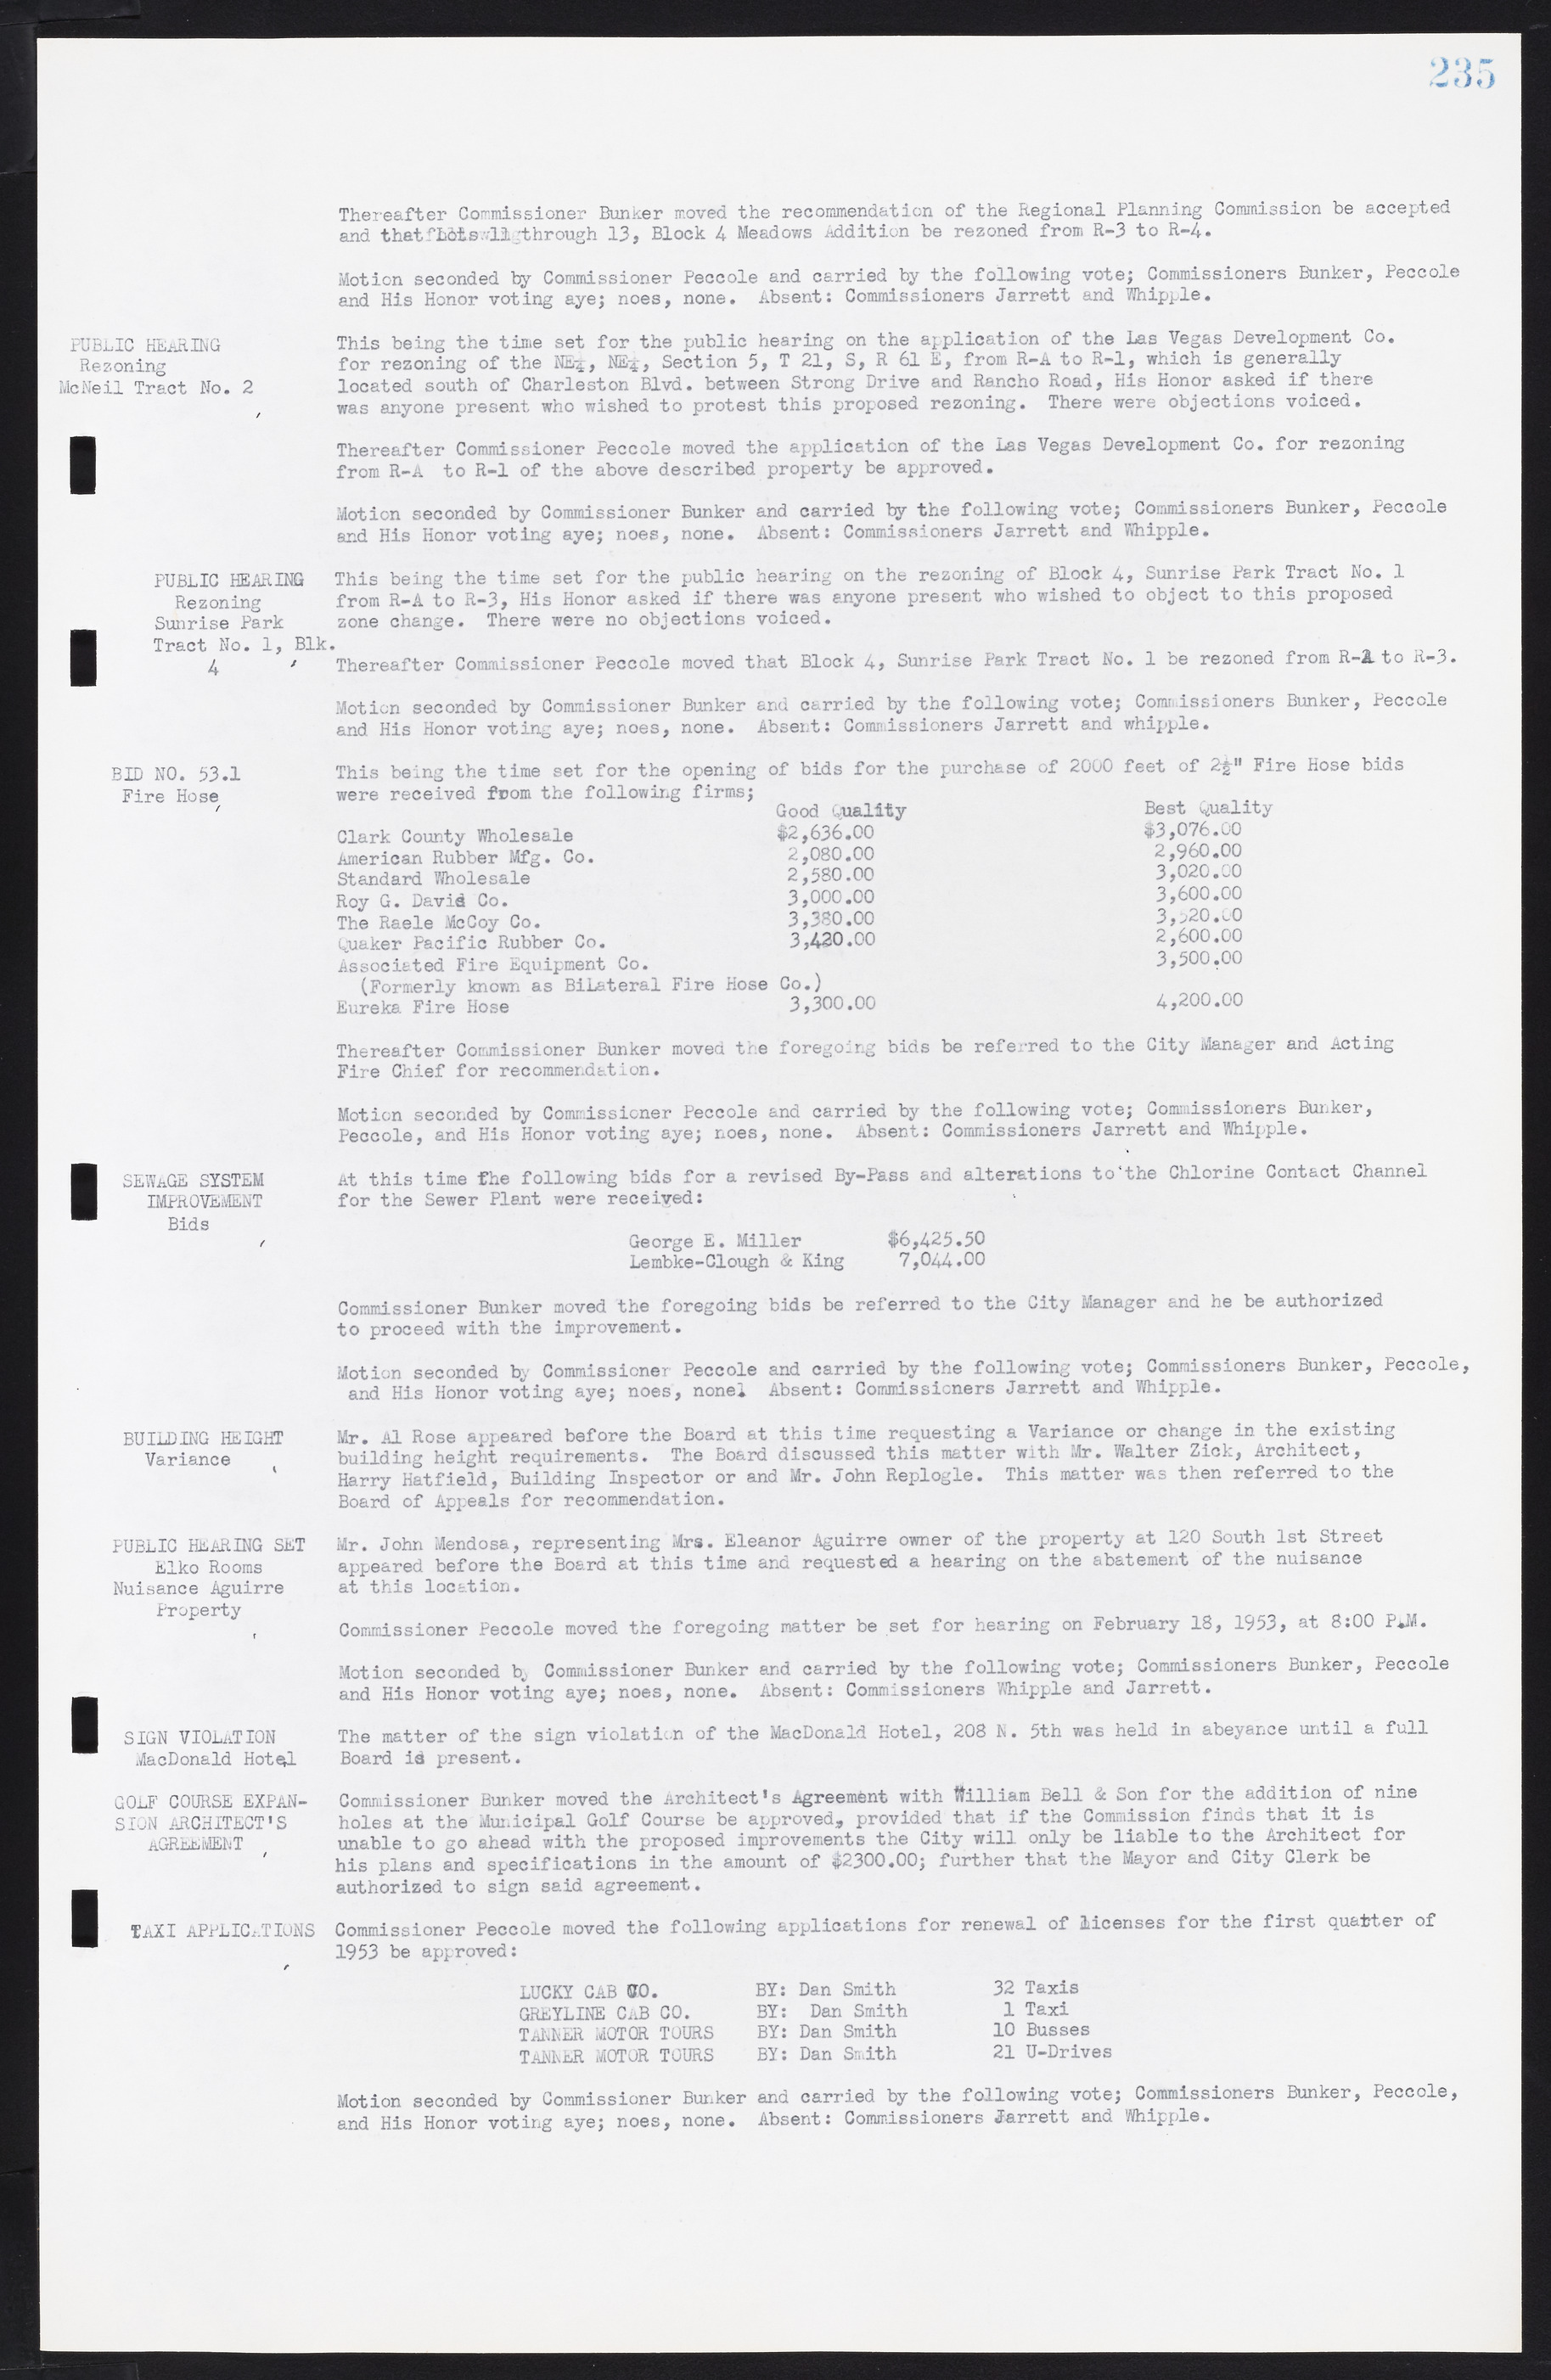 Las Vegas City Commission Minutes, May 26, 1952 to February 17, 1954, lvc000008-251